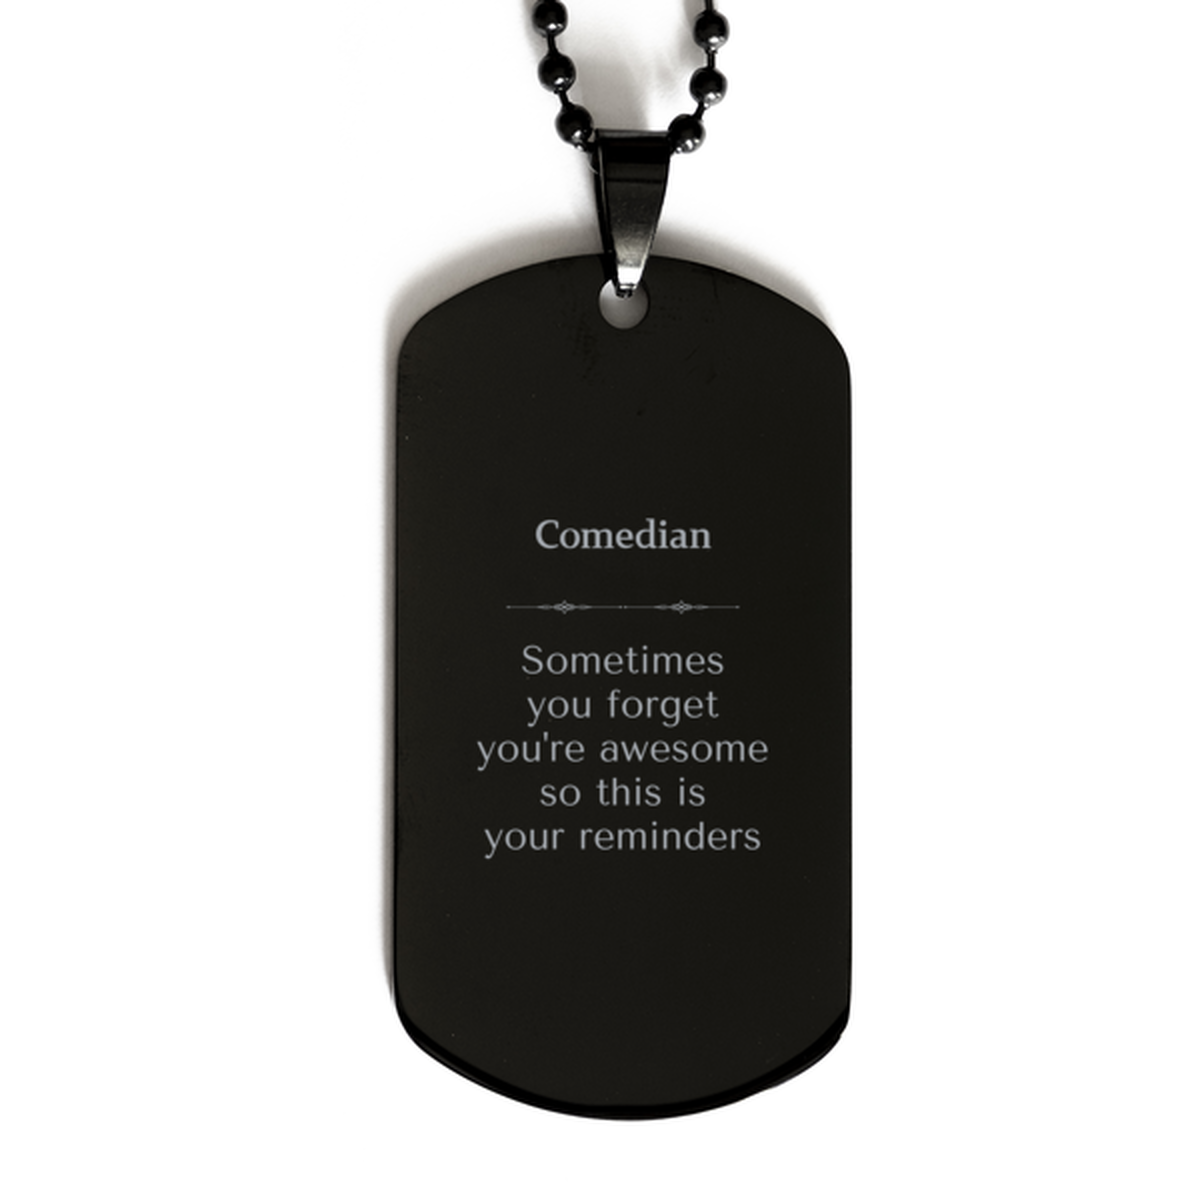 Sentimental Comedian Black Dog Tag, Comedian Sometimes you forget you're awesome so this is your reminders, Graduation Christmas Birthday Gifts for Comedian, Men, Women, Coworkers